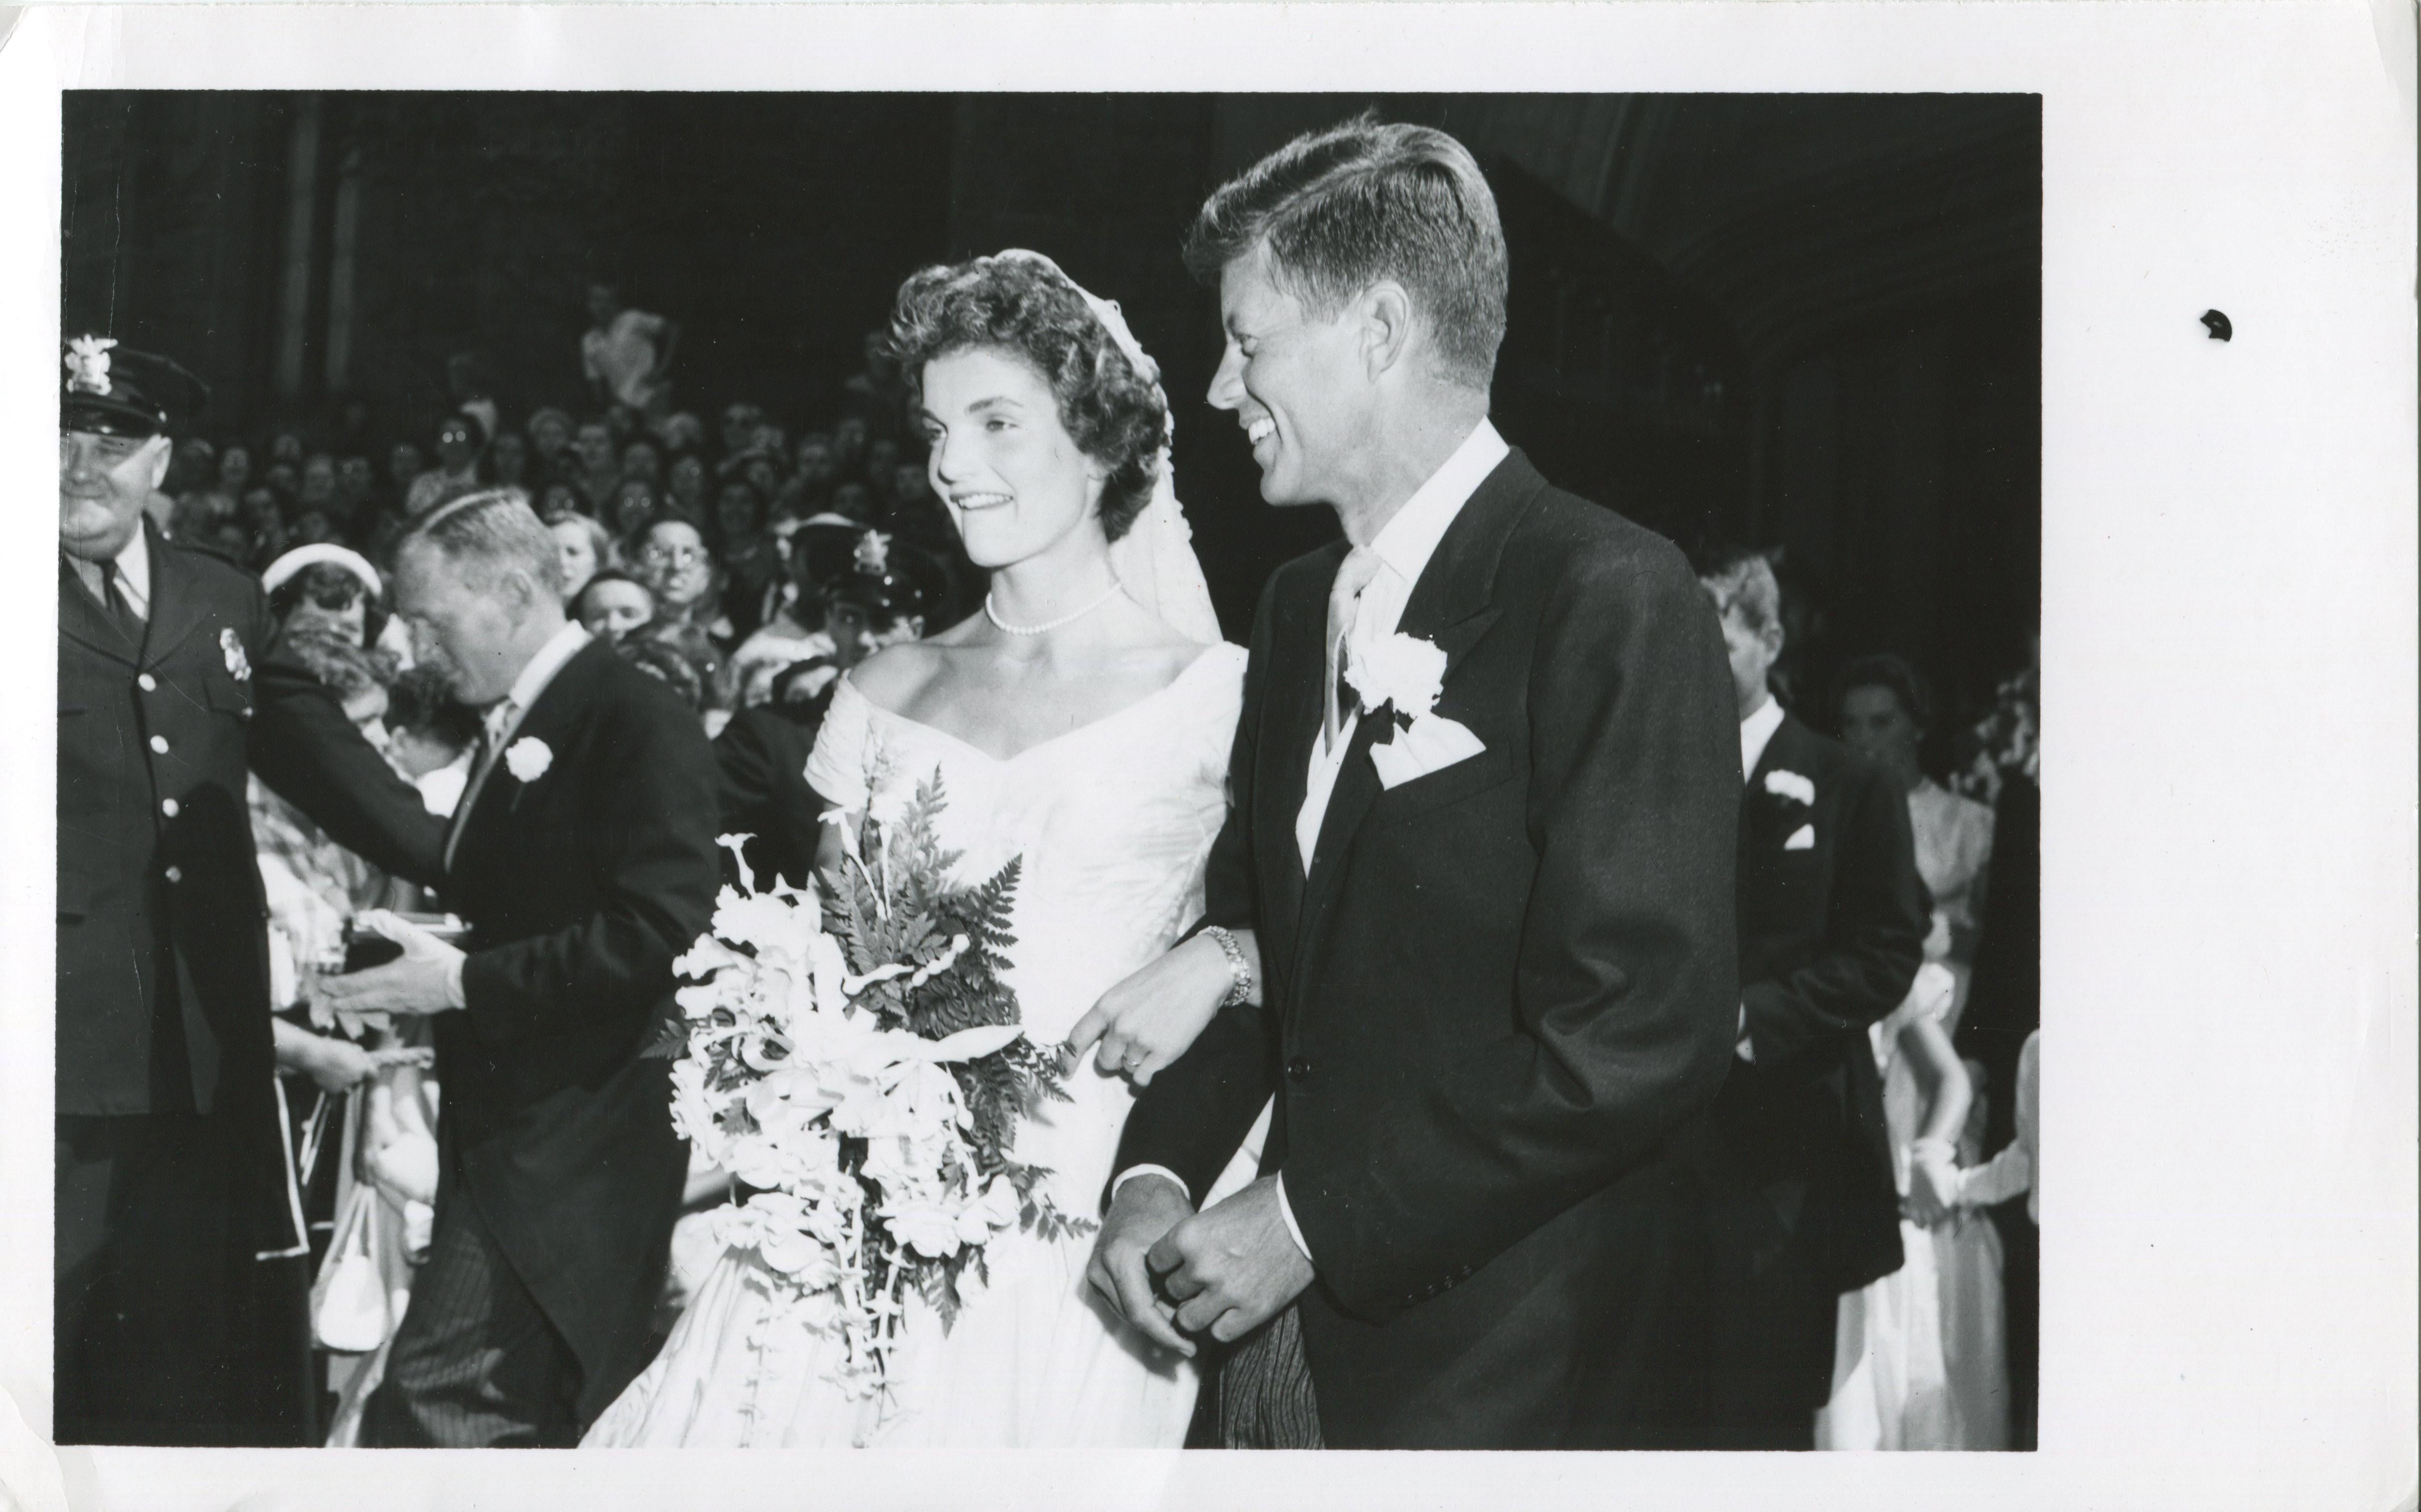 Unknown Black and White Photograph - Wedding John F. Kennedy & Jacqueline Kennedy - Official Press Photo